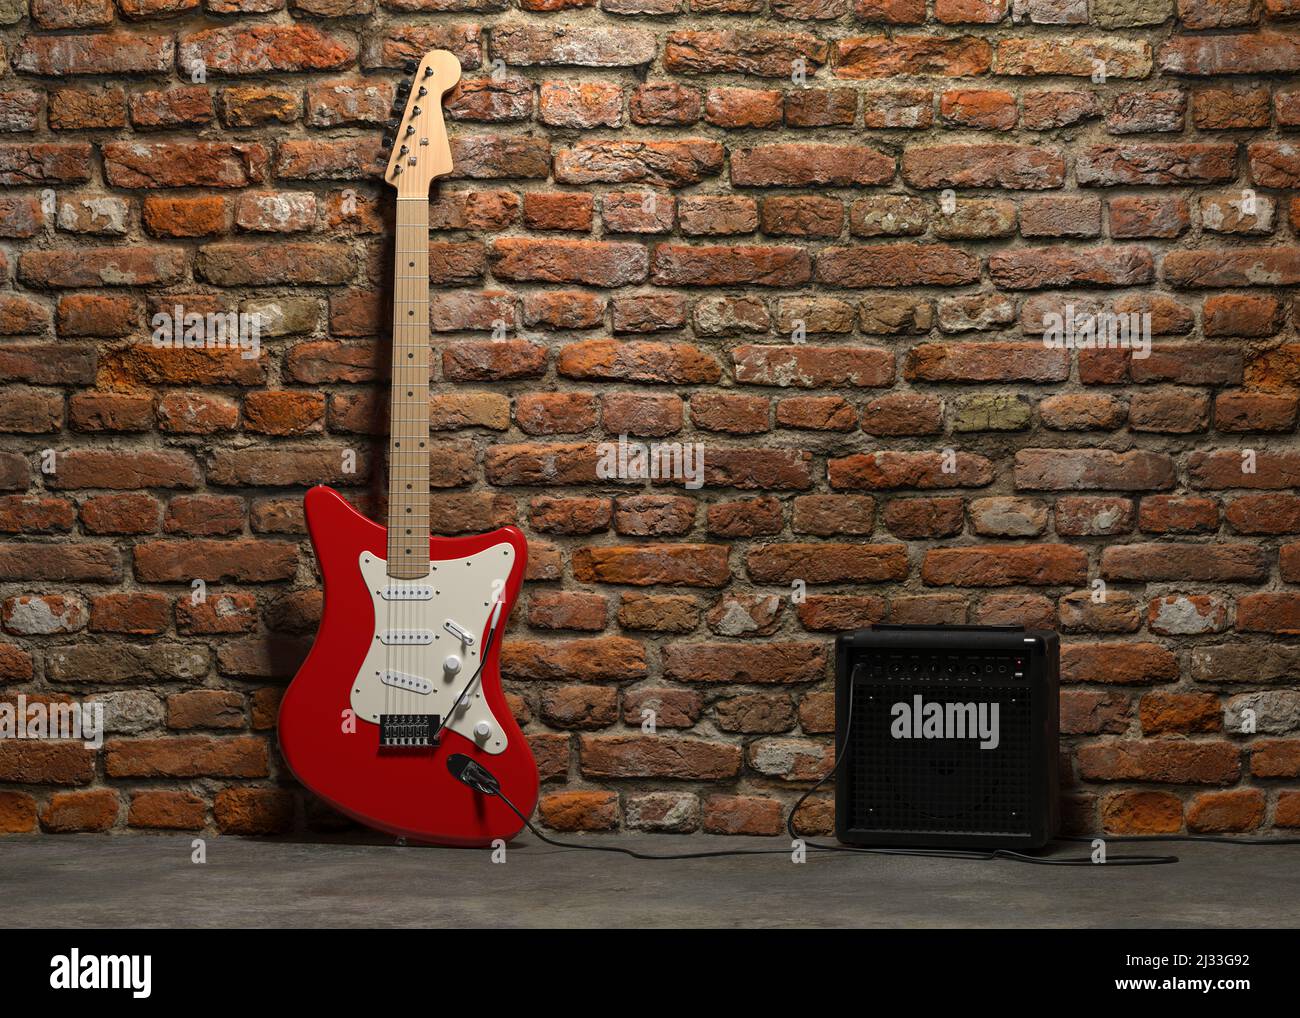 red electric guitar on a stand isolated on white background Stock Photo -  Alamy